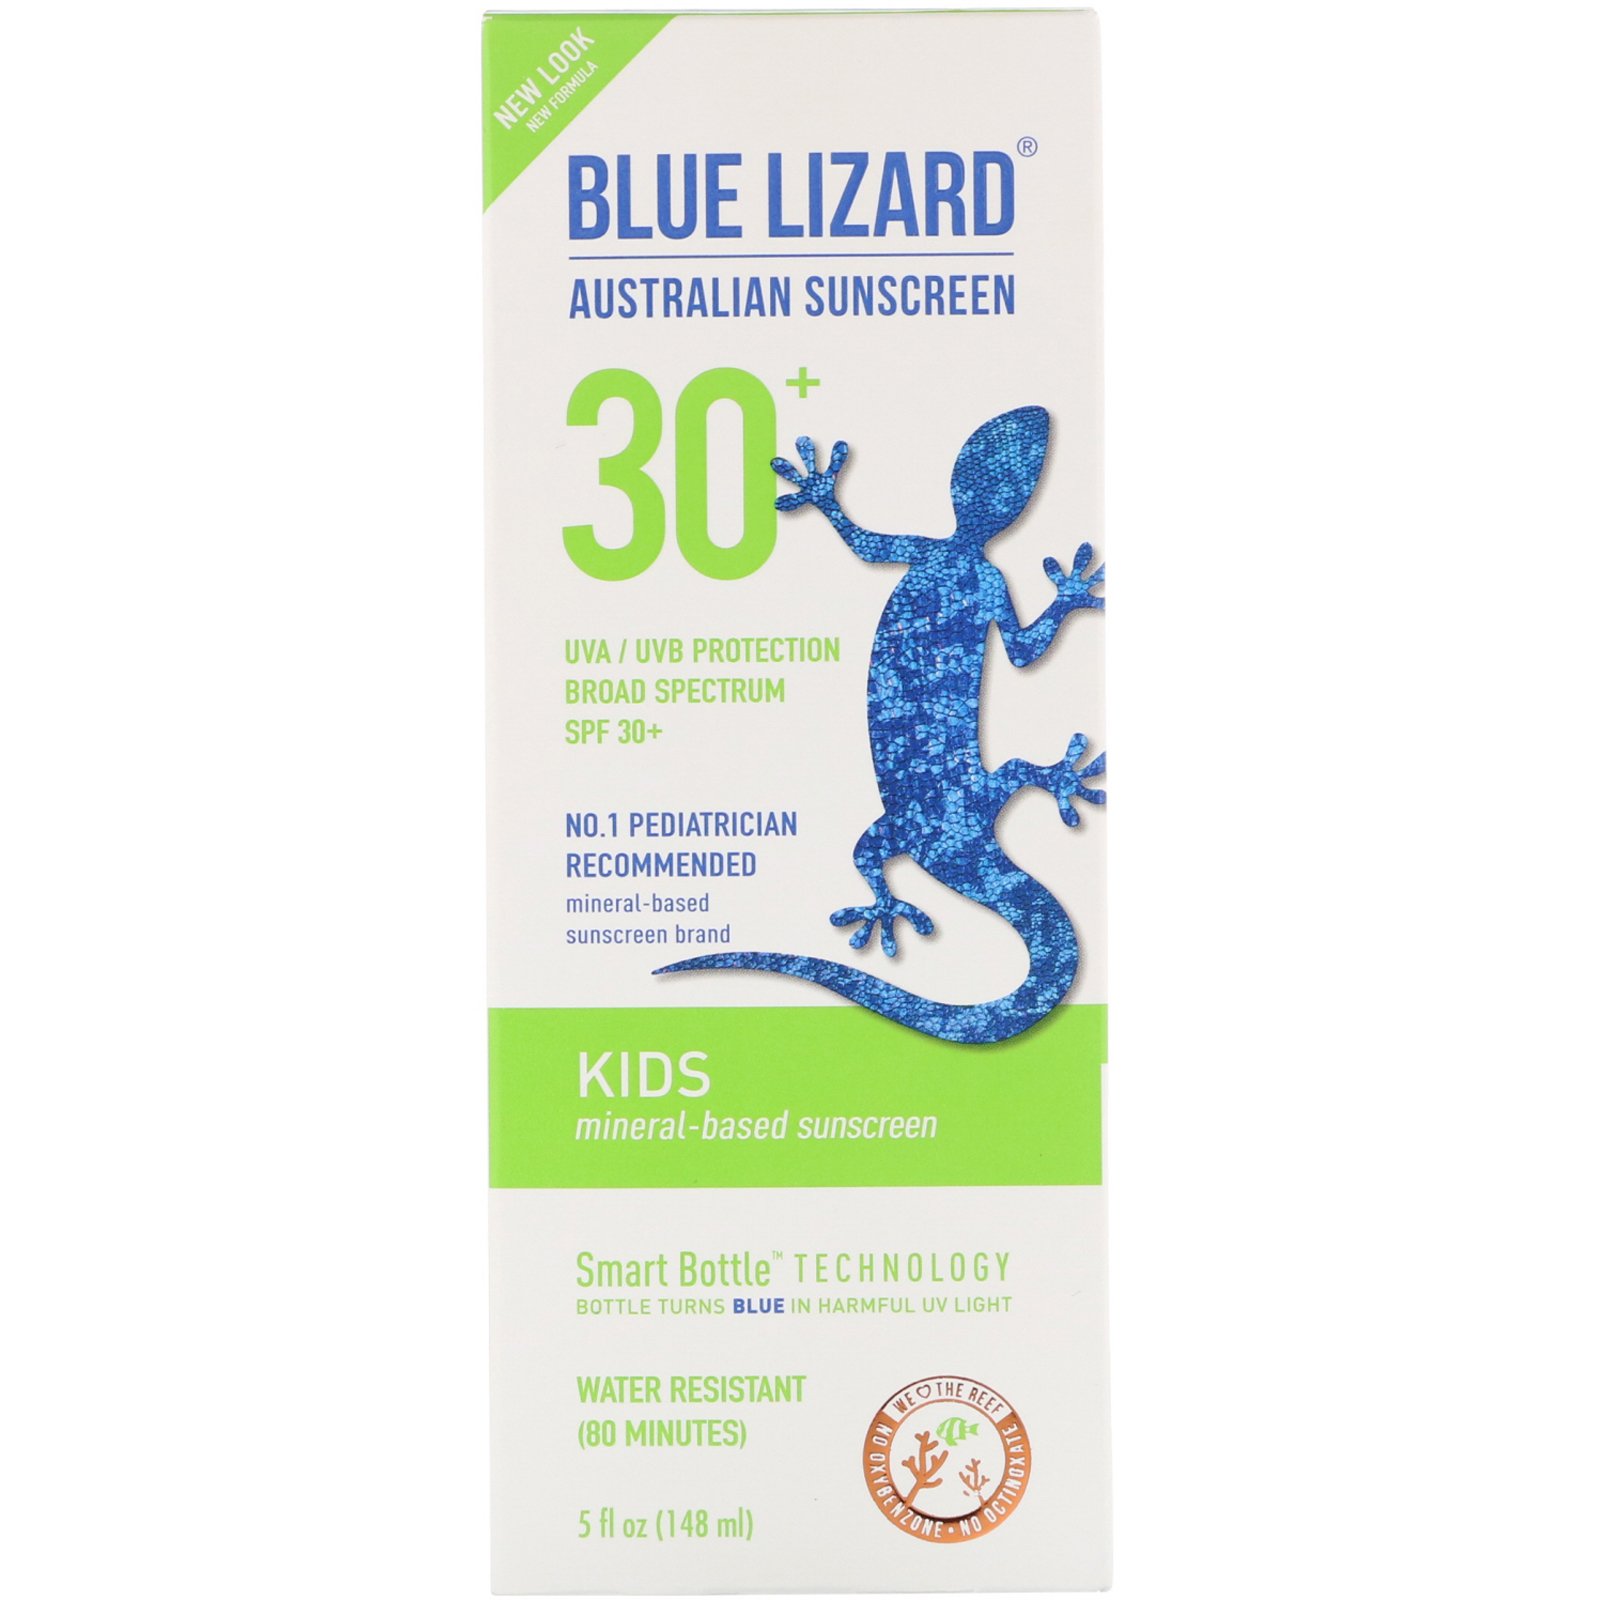 does blue lizard sunscreen stain clothes